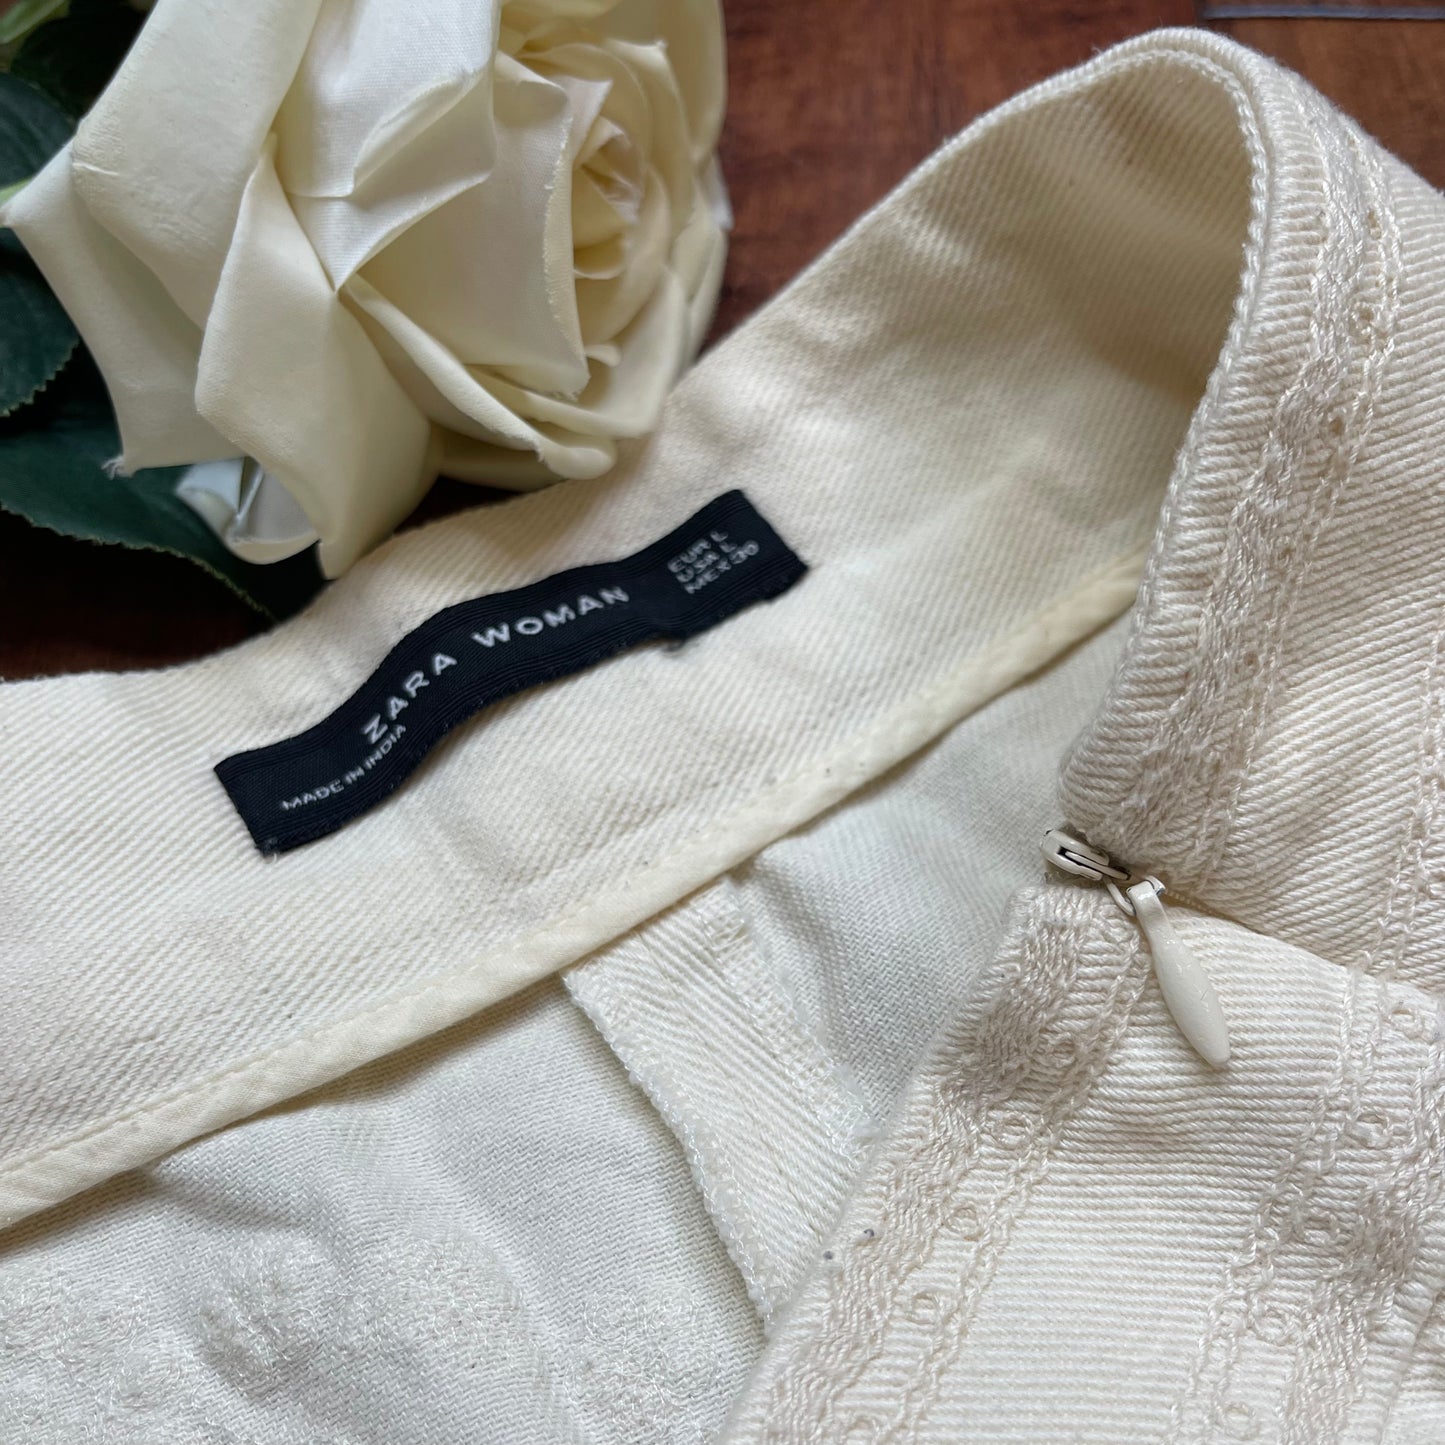 THRIFTED ZARA HIGH-WAISTED EMBROIDERED CREAM SHORTS